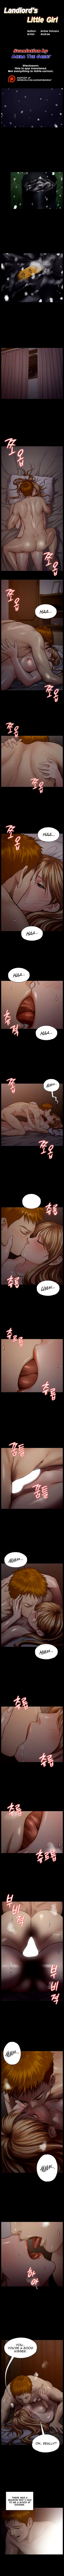 Panel Image 1 for chapter 103 of manhwa Queen Bee on read.oppai.stream